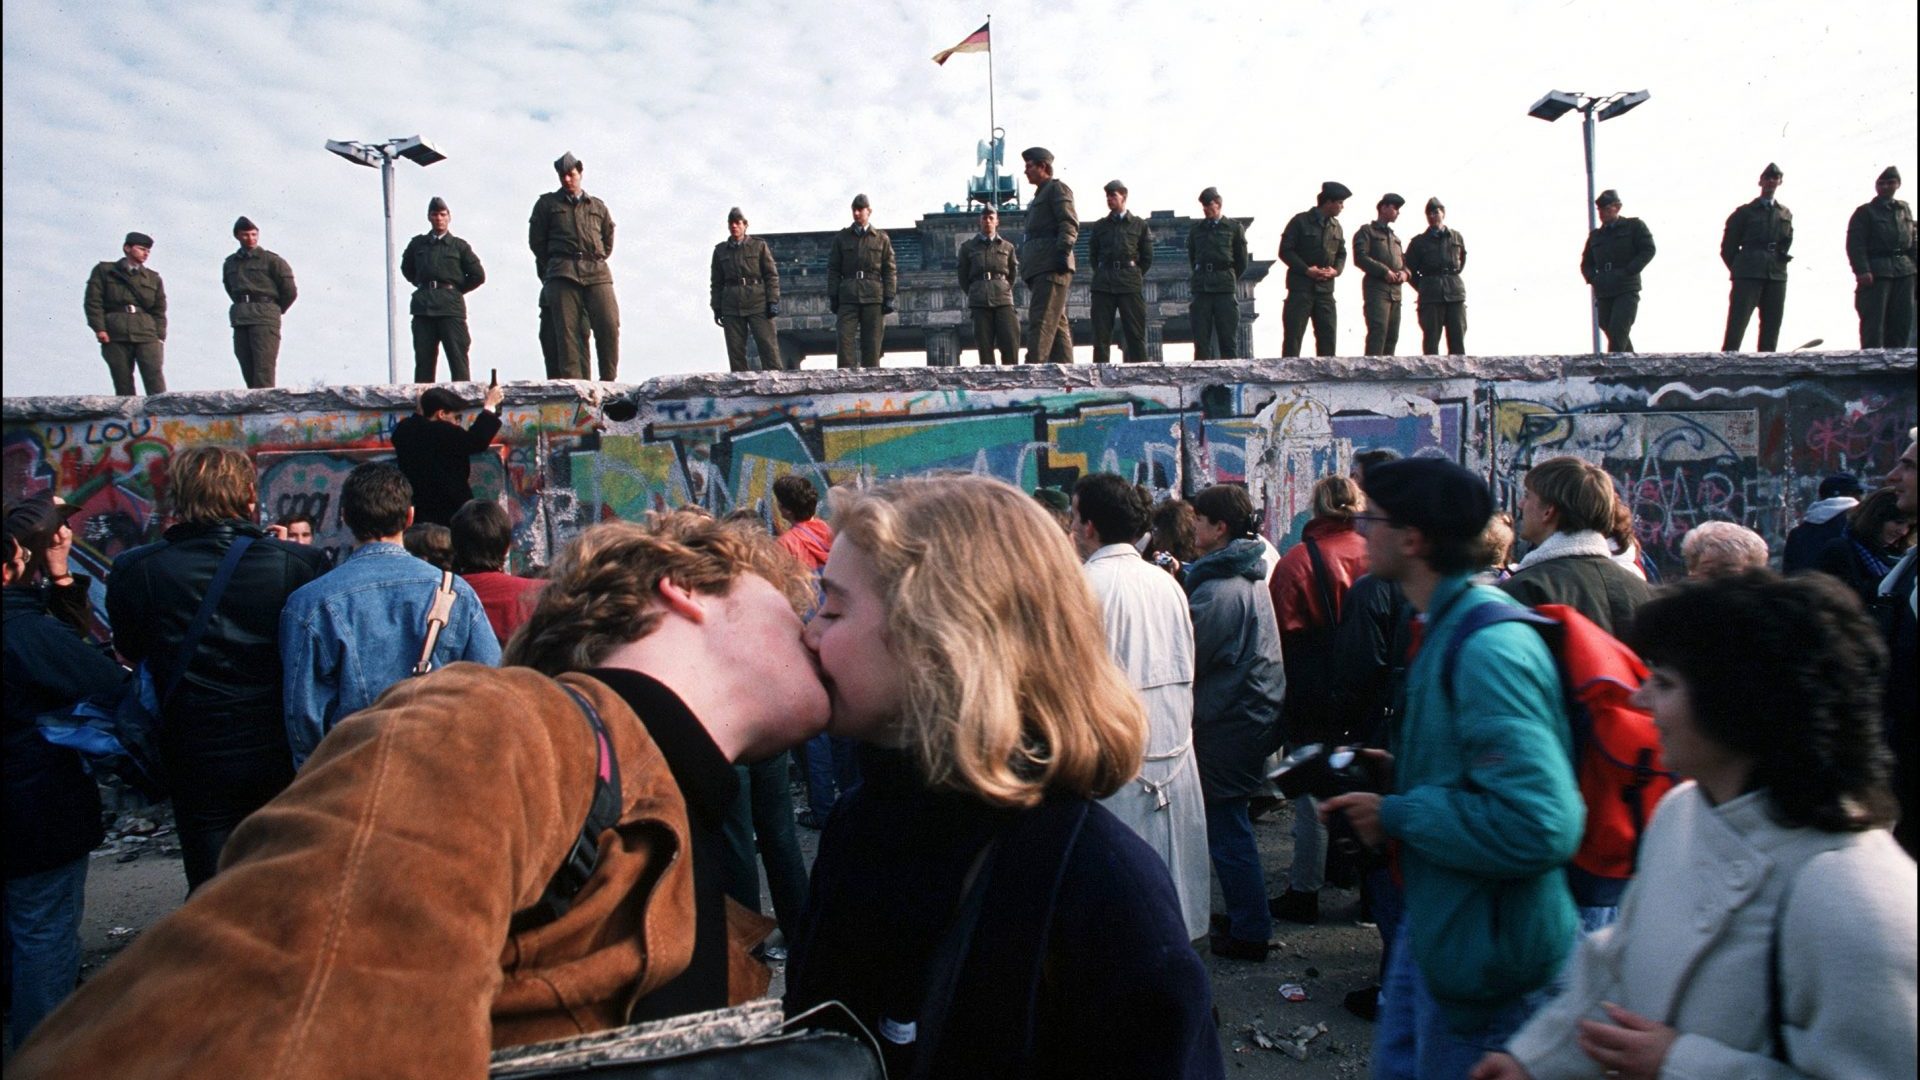 Jenny Erpenbeck’s
novel, Kairos,
explores an intense
relationship in East
Germany before
and after the fall
of the Berlin Wall. Photo: Patrick Piel/
Gamma-Rapho/
Getty